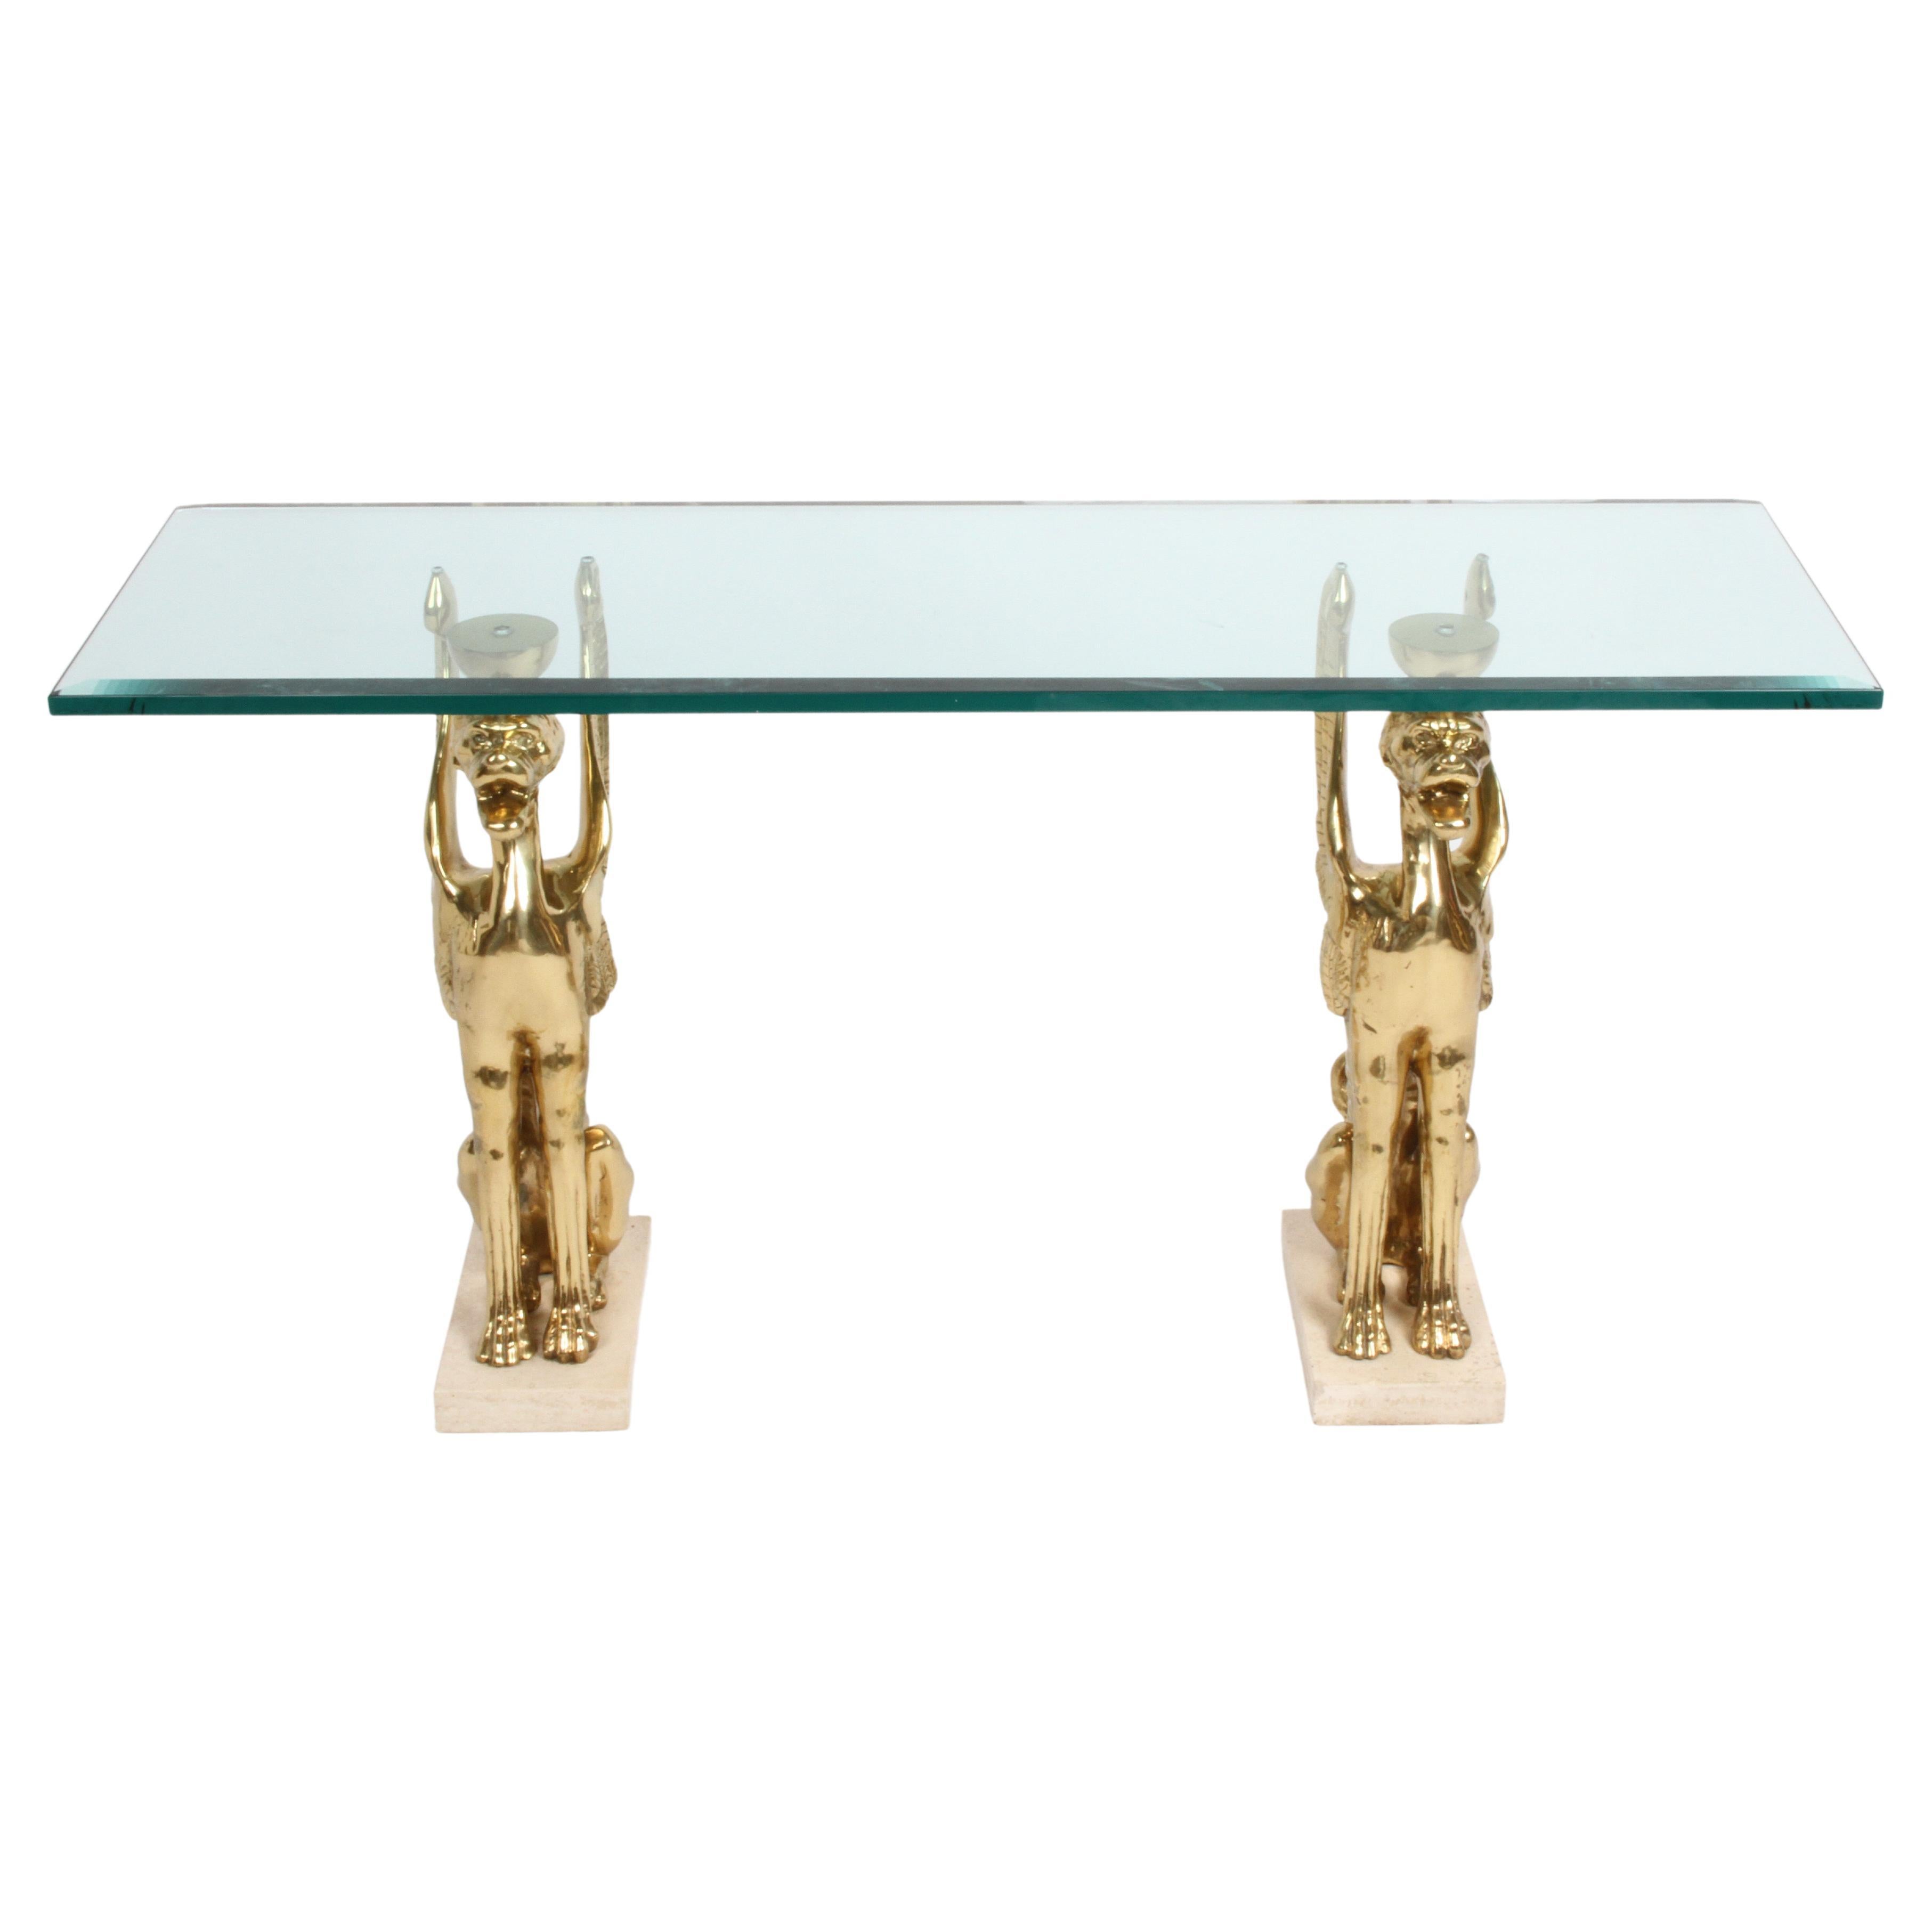 Unique Hollywood Regency Stylized Bronze Griffins Glass Console or Entry Table